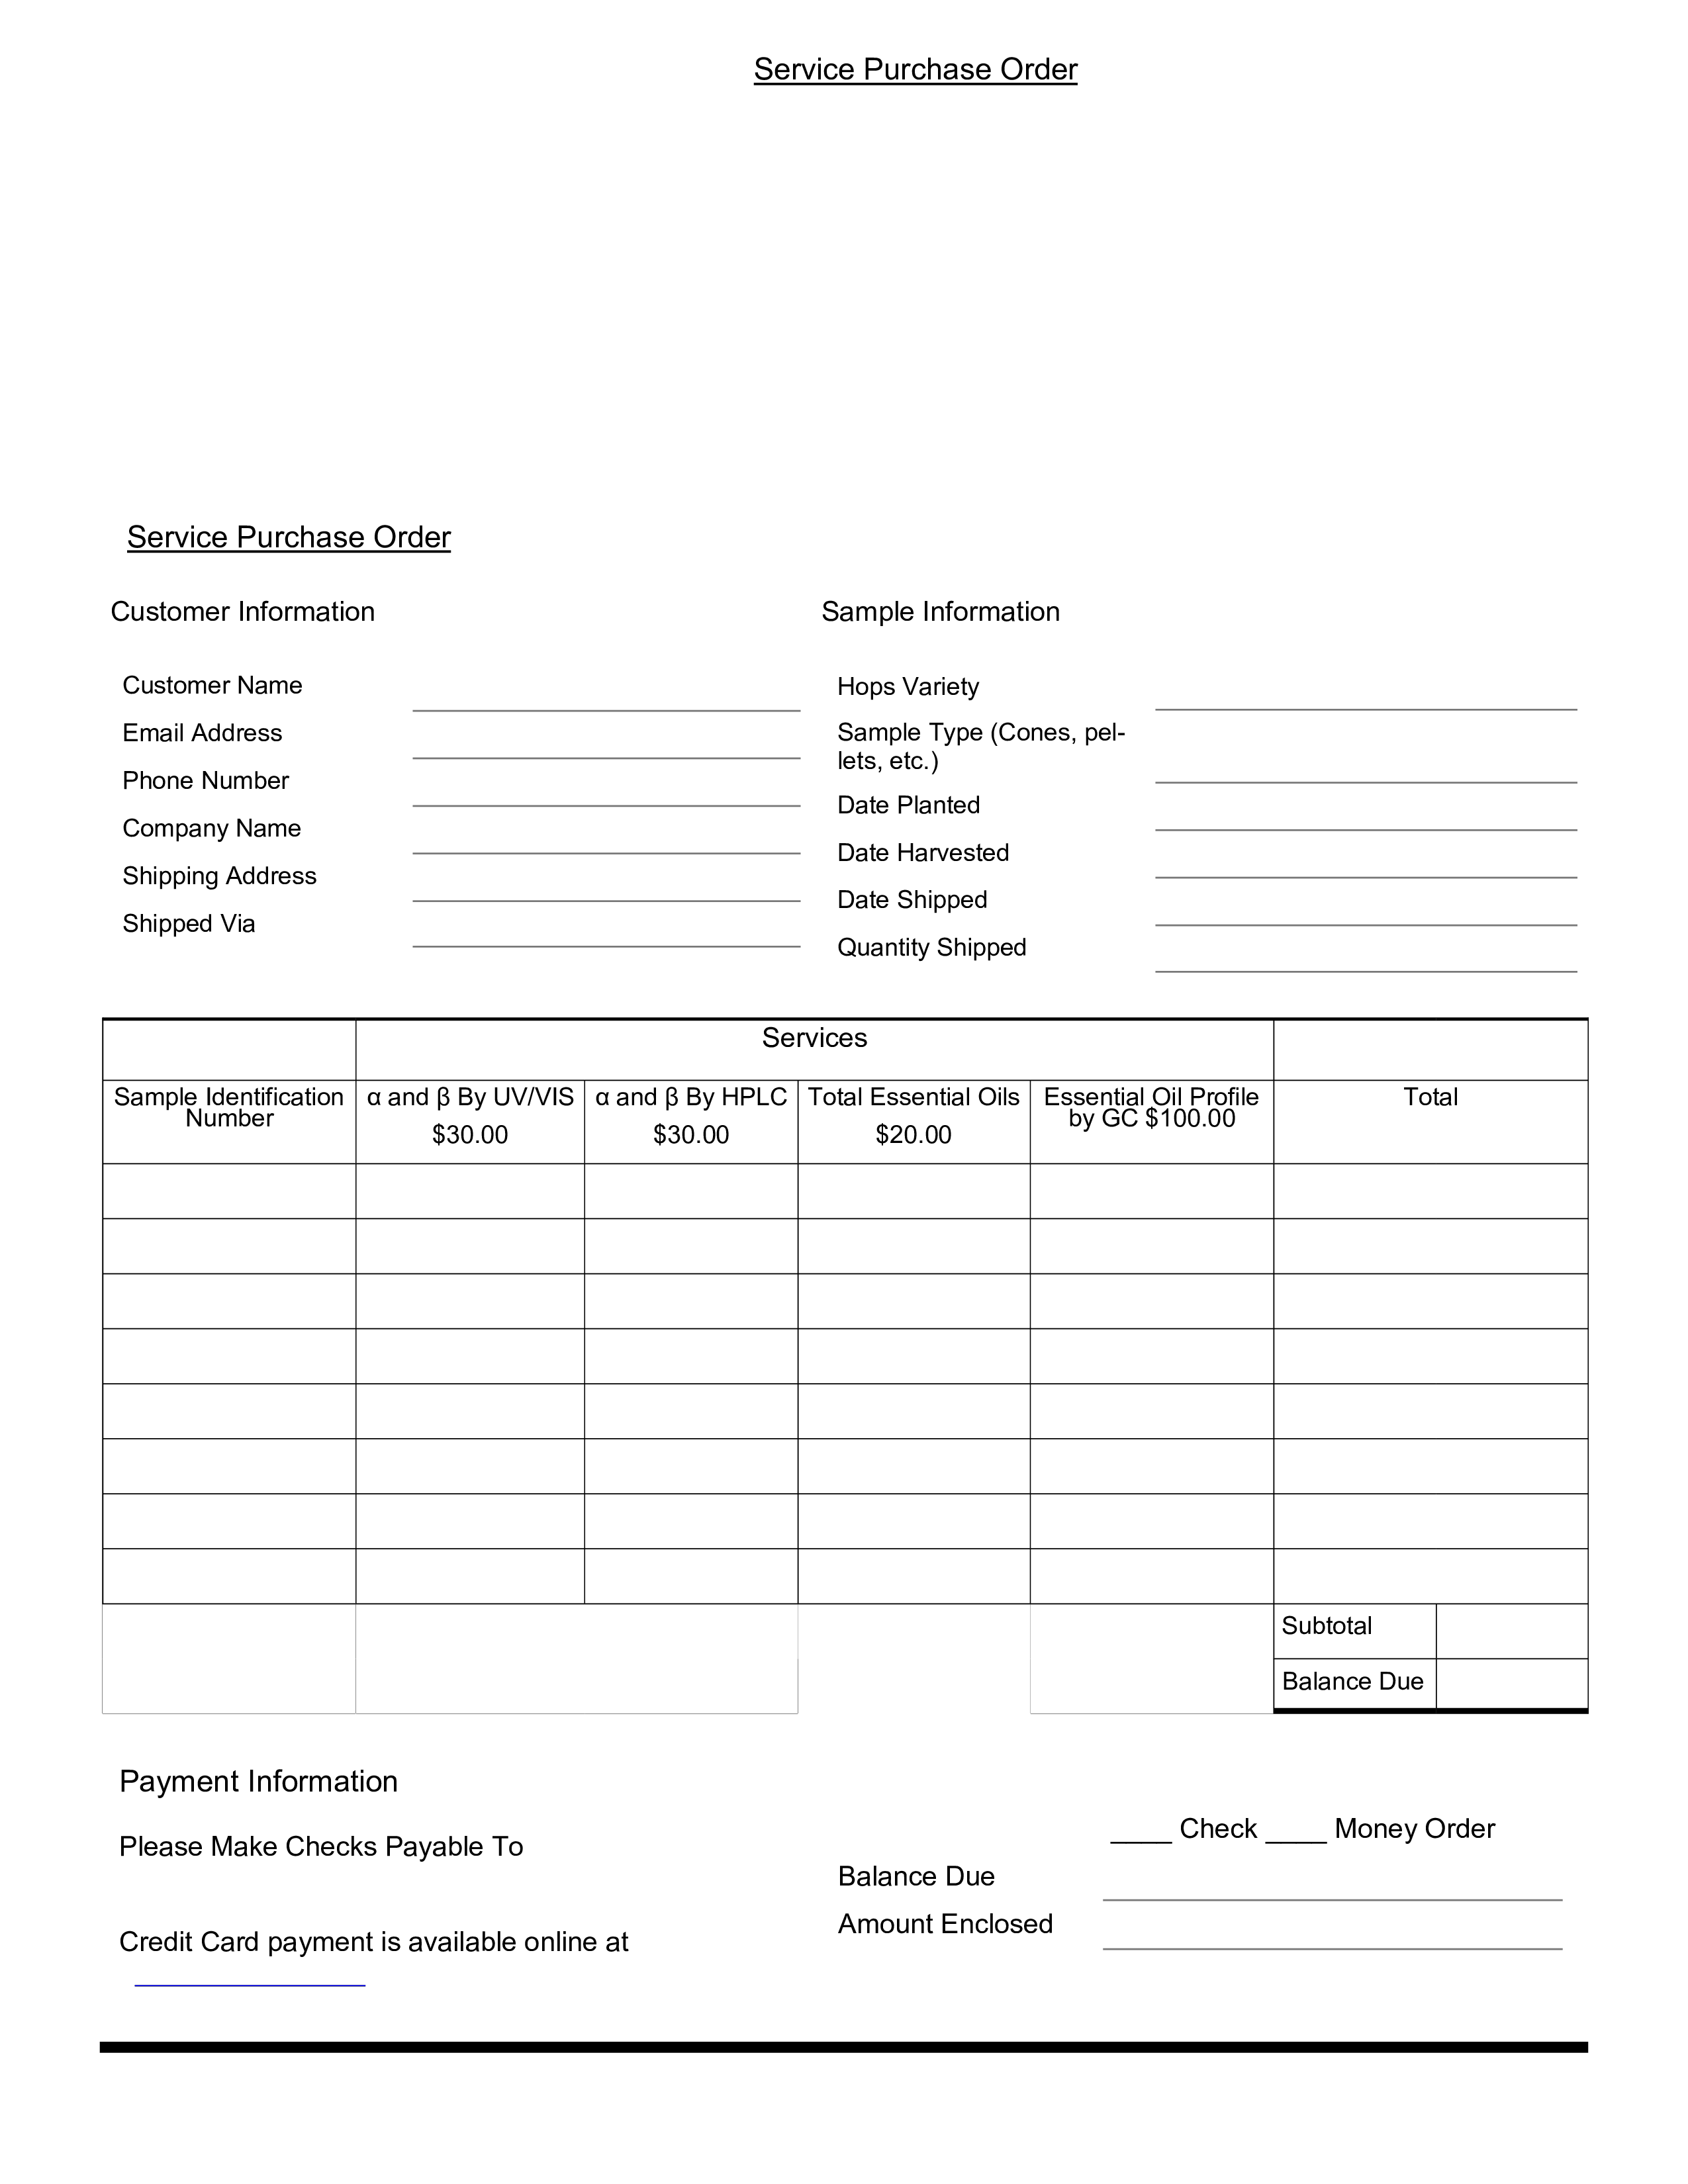 Service Purchase Order main image